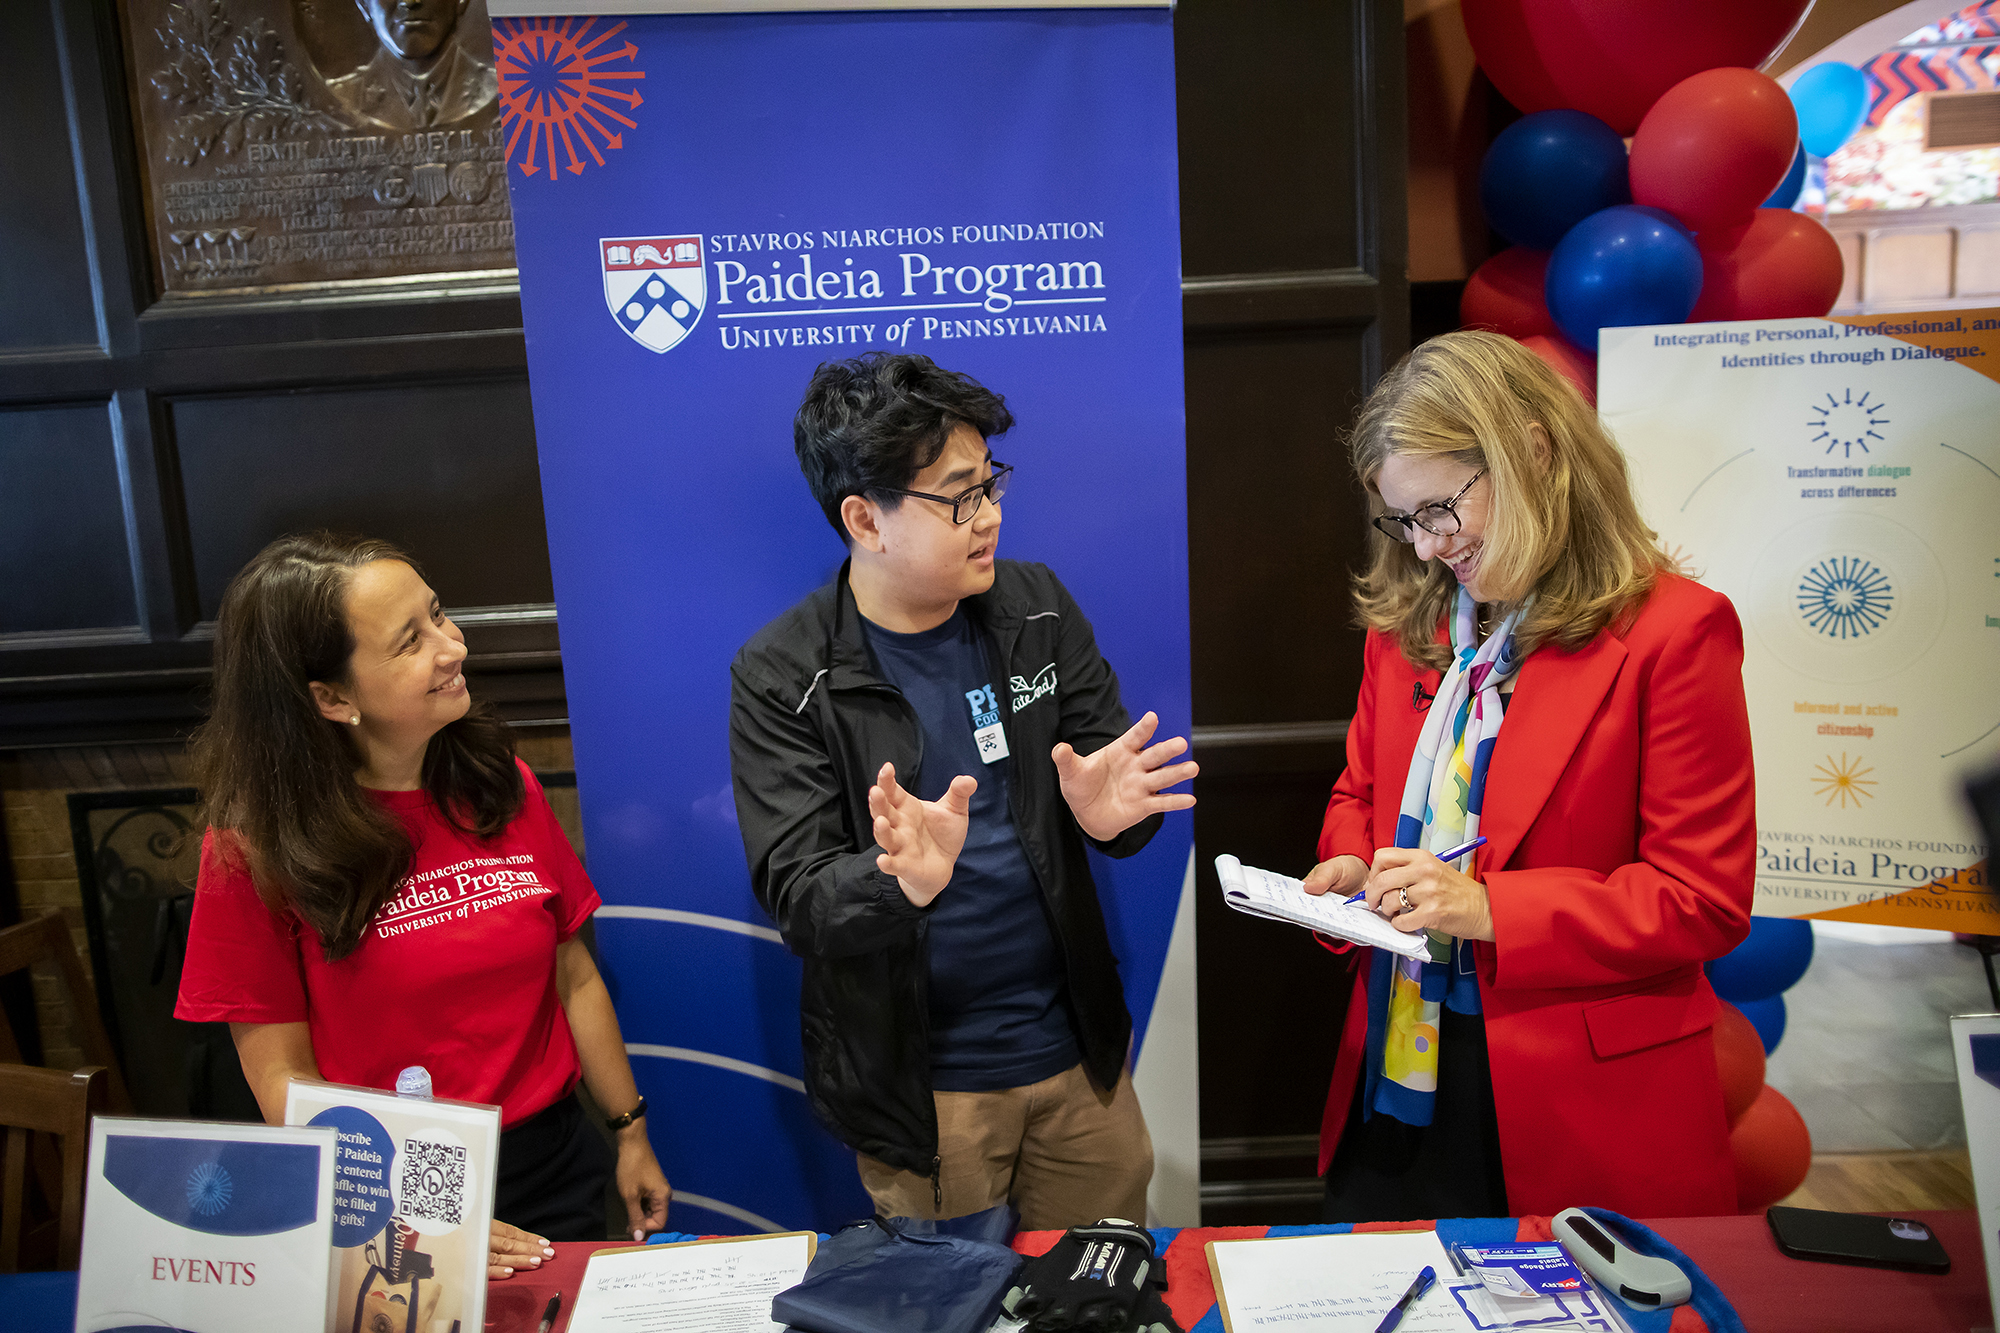 Liz Magill and two students at a table advertising Penn’s Paideia Program.